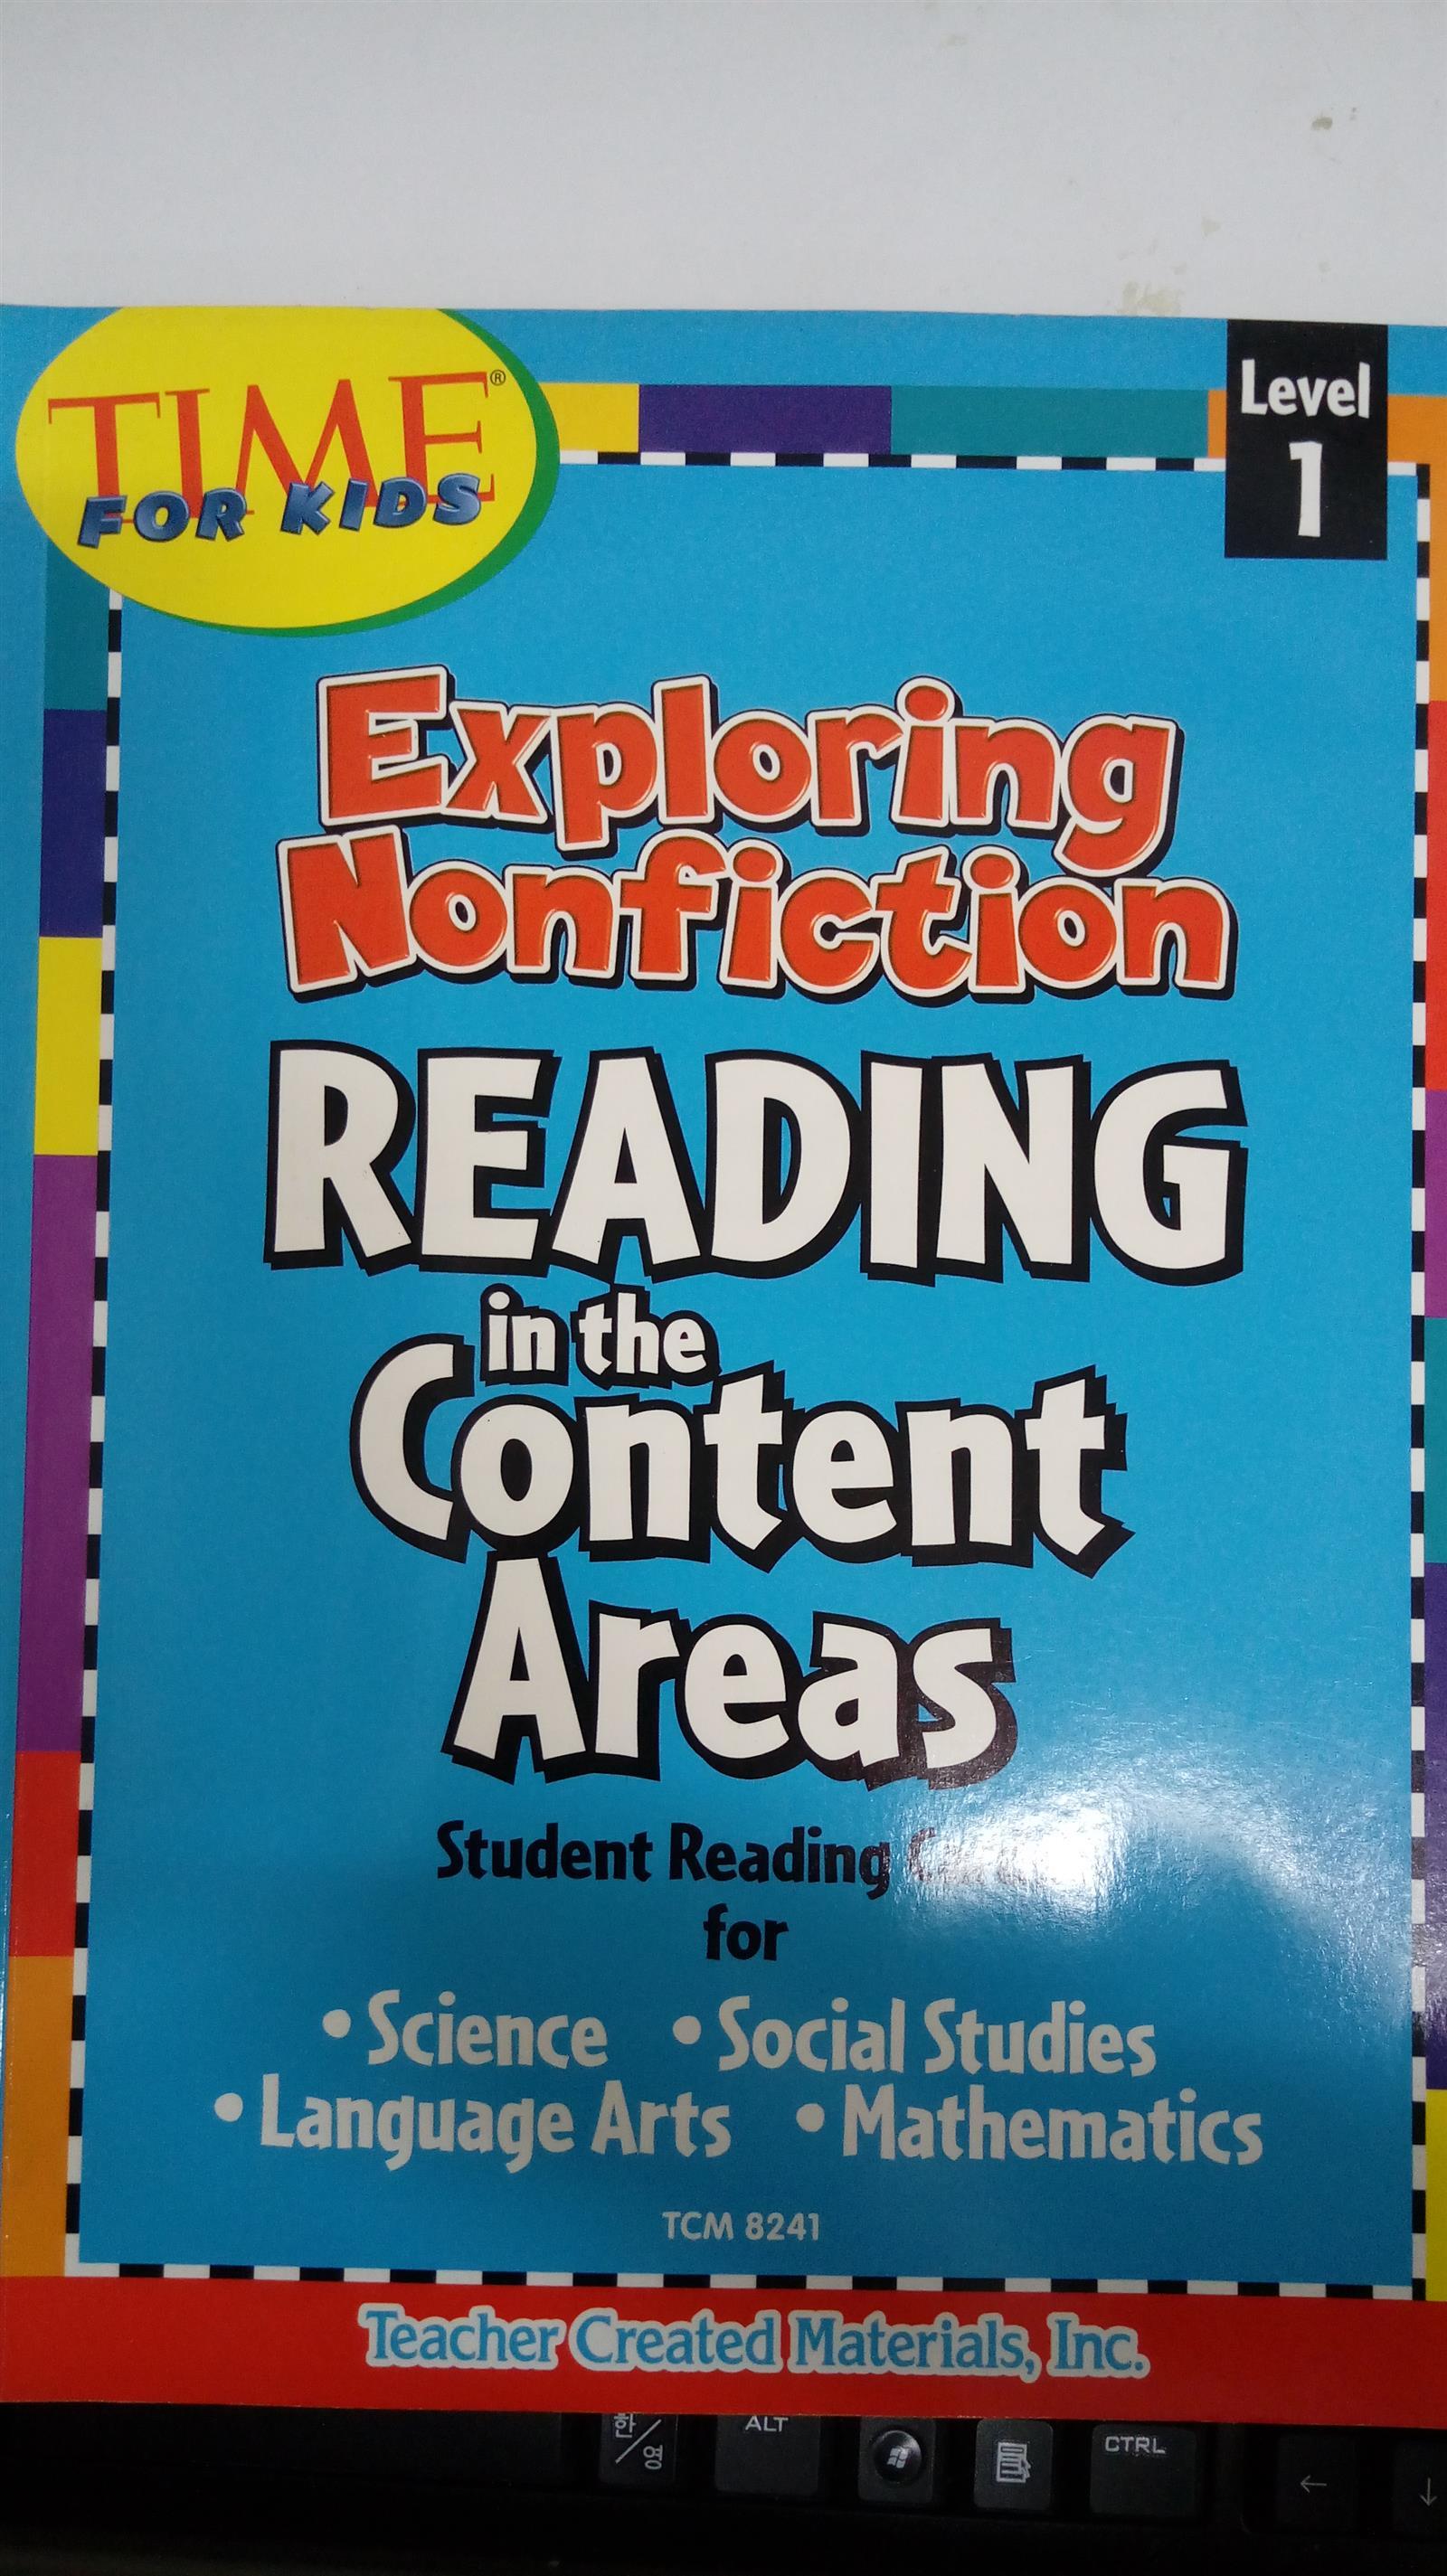 EXPLORING NONFICTION: READING IN THE CONTENT AREAS